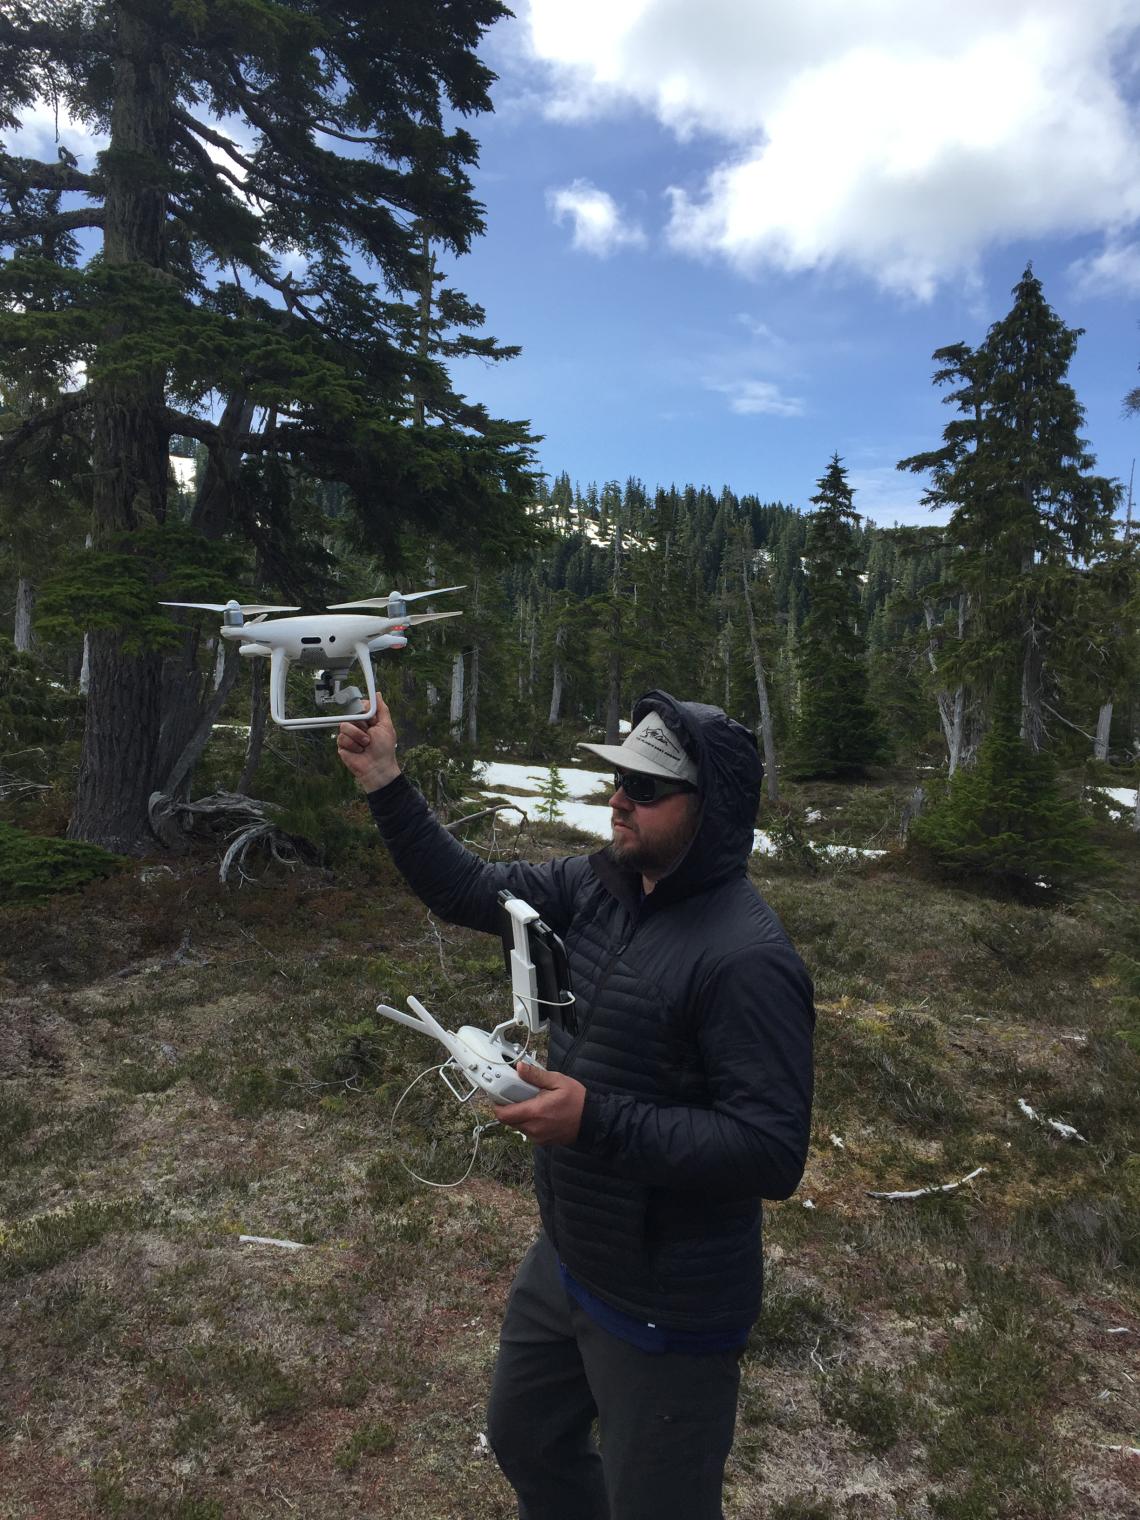 Using an unmanned aerial vehicle (UAV) to measure snow depth.